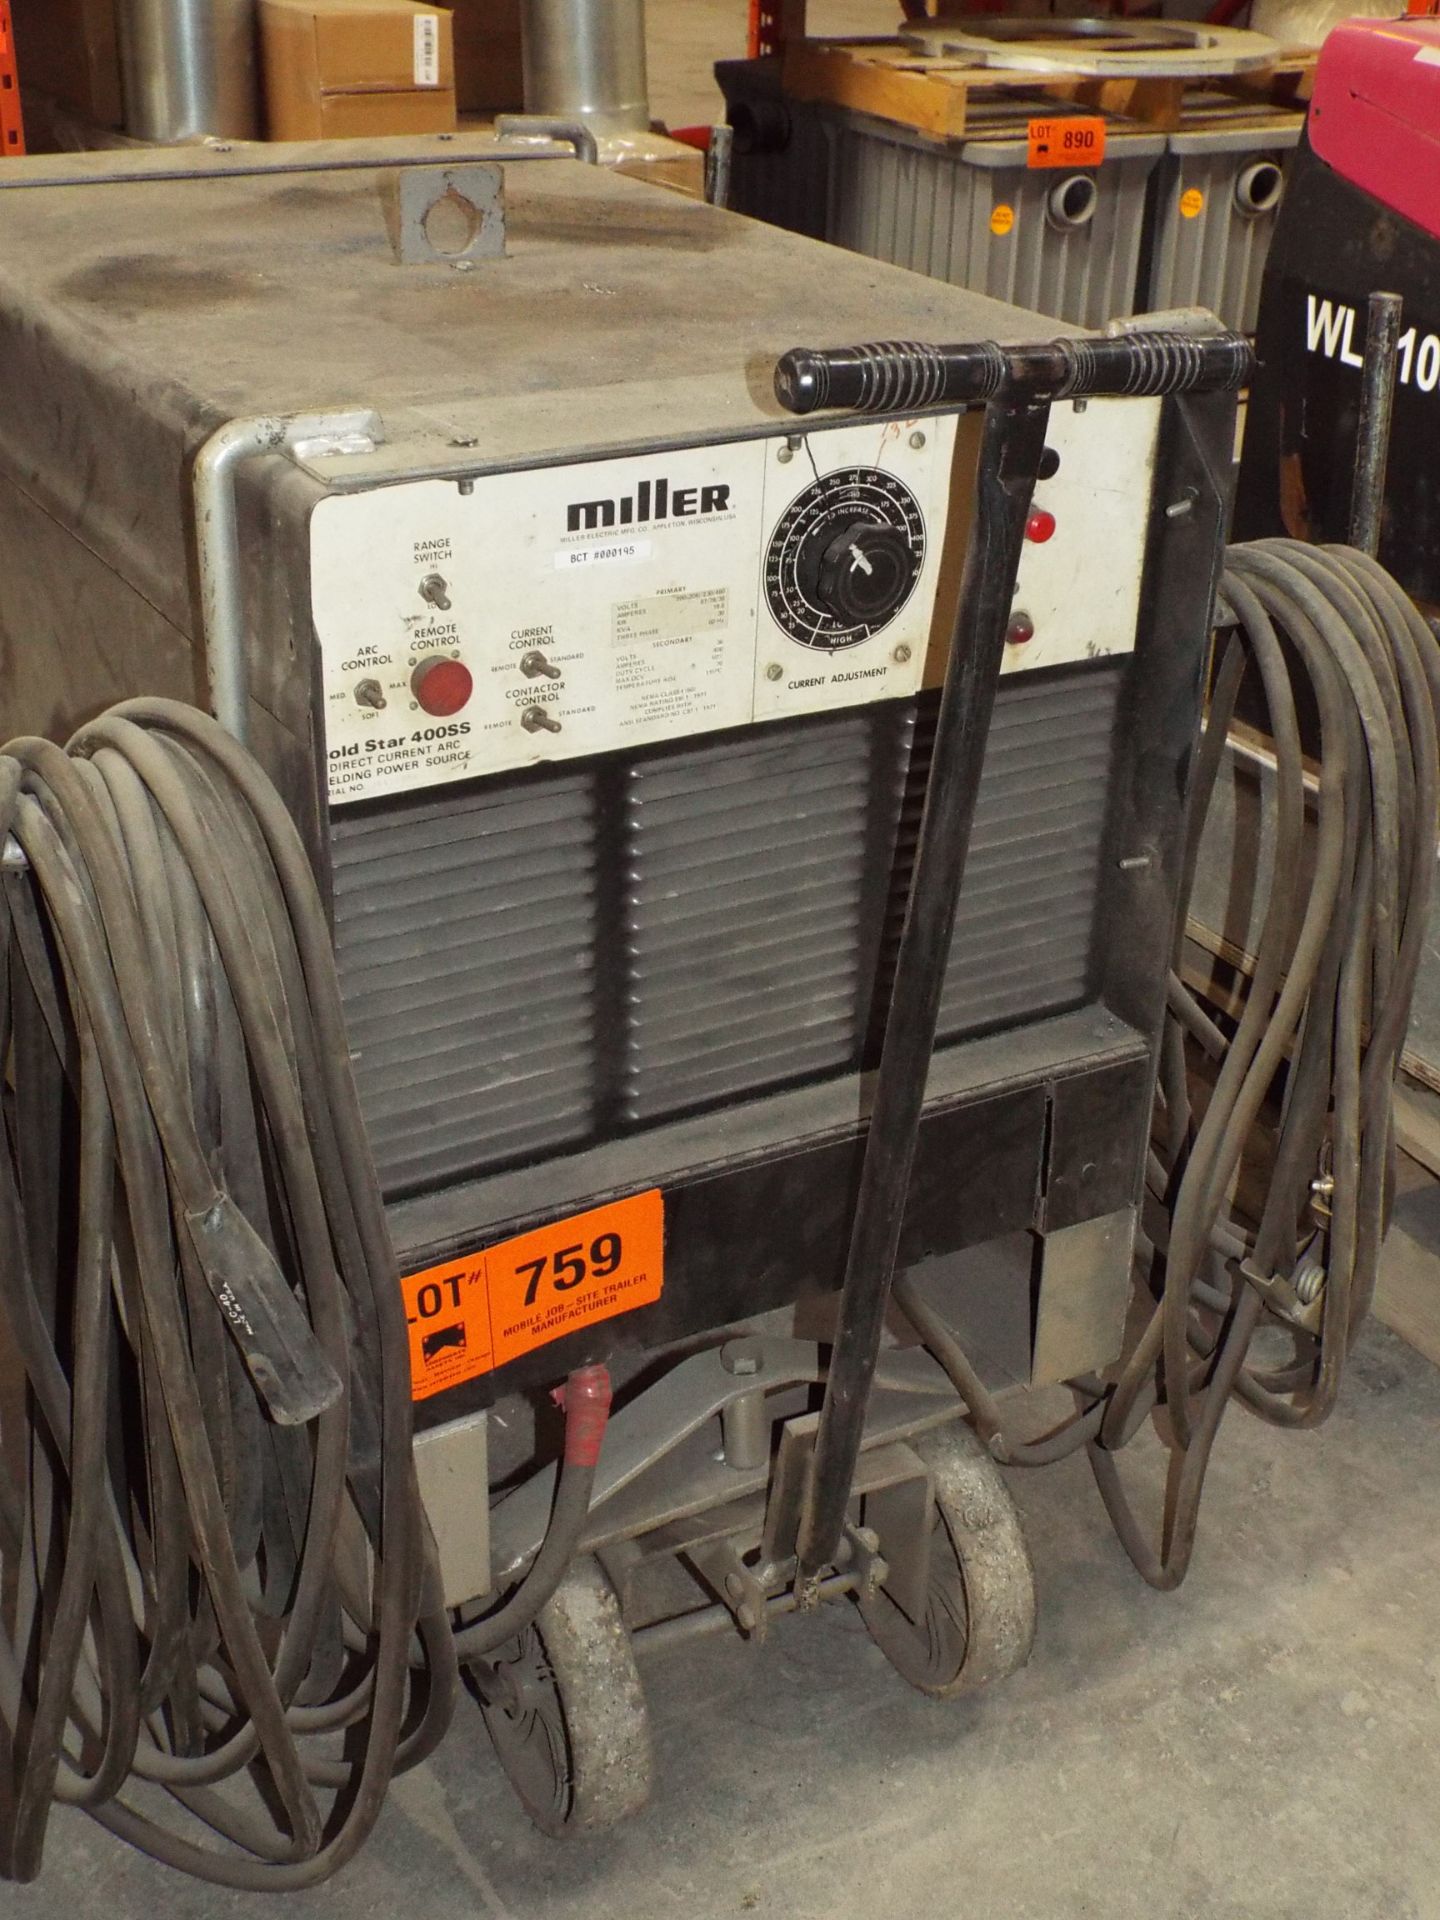 MILLER GOLD STAR 400SS PORTABLE ARC WELDER WITH CABLES AND GUN, S/N: N/A